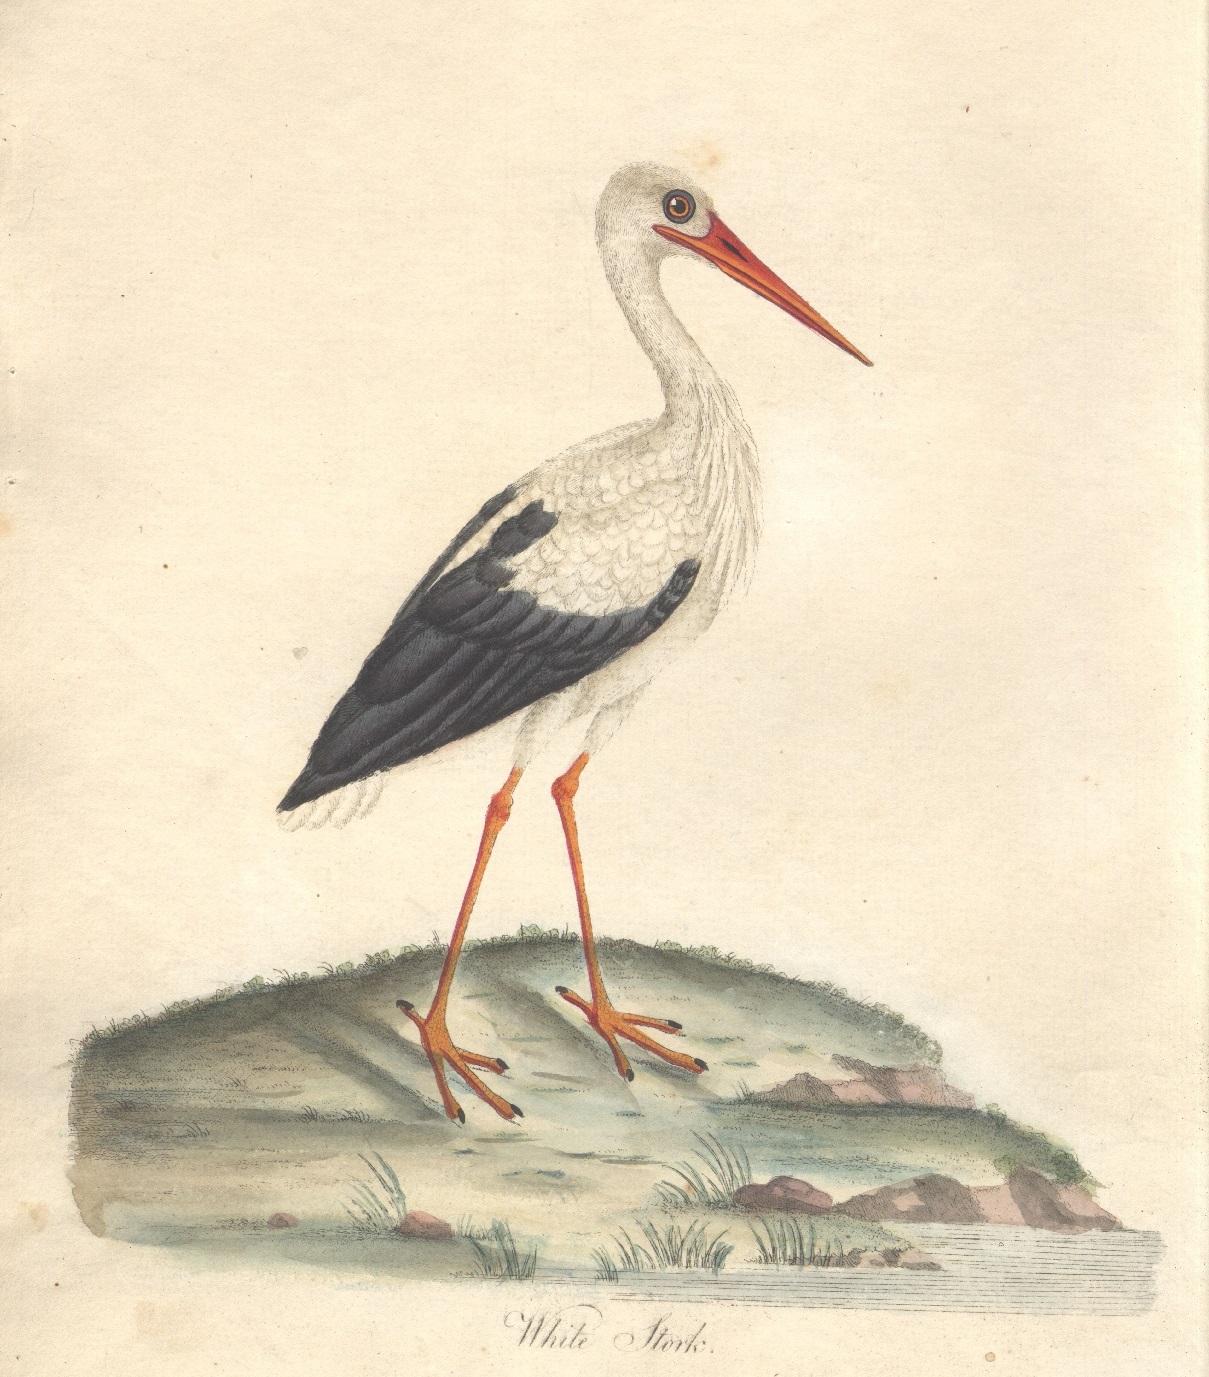 Hayes, W. Portraits of rare and curious birds, 1794